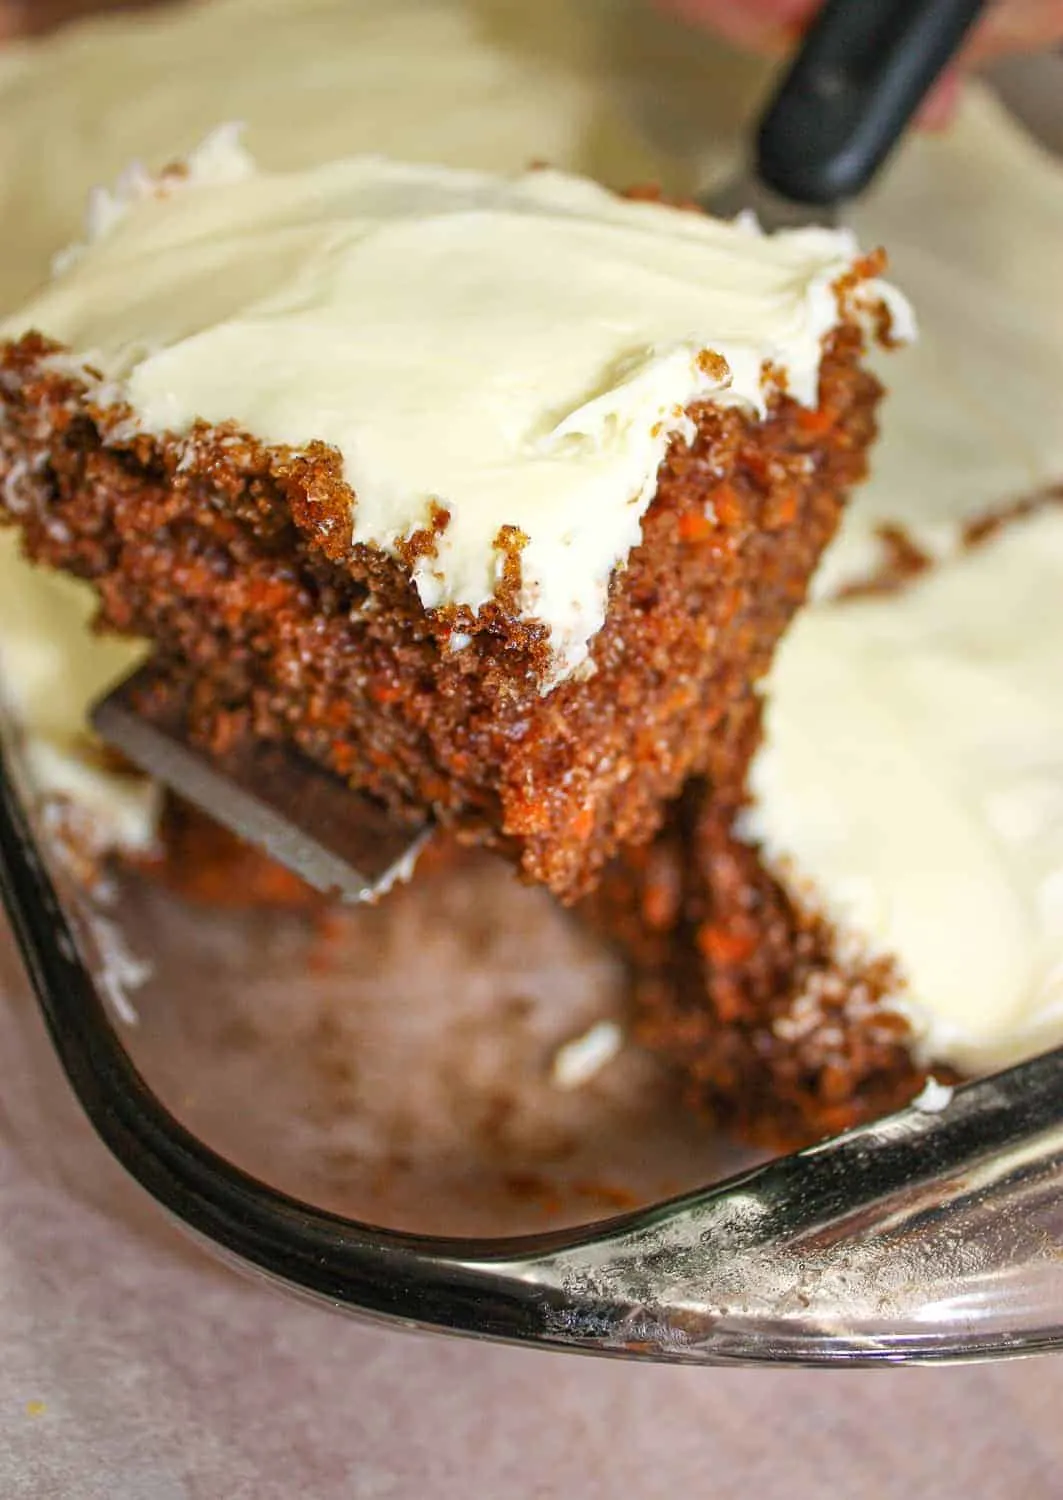 Carrot Cake is one of my all time favourites and this recipe, adapted from one my sister-in-law shared with me, will please everyone not just those that have to avoid gluten.